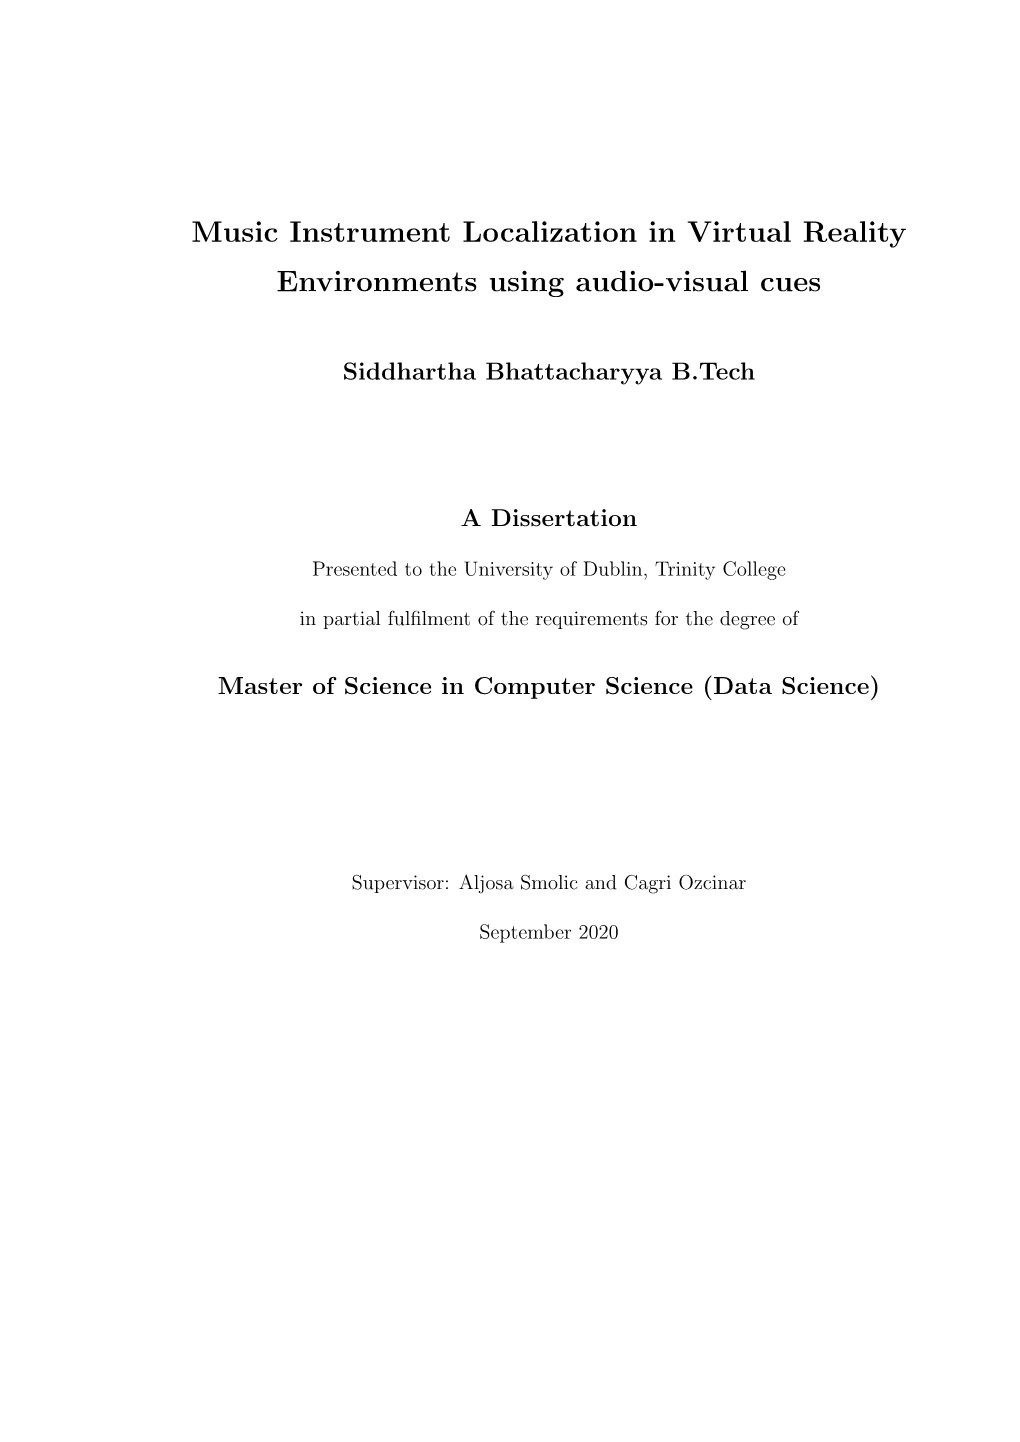 Music Instrument Localization in Virtual Reality Environments Using Audio-Visual Cues